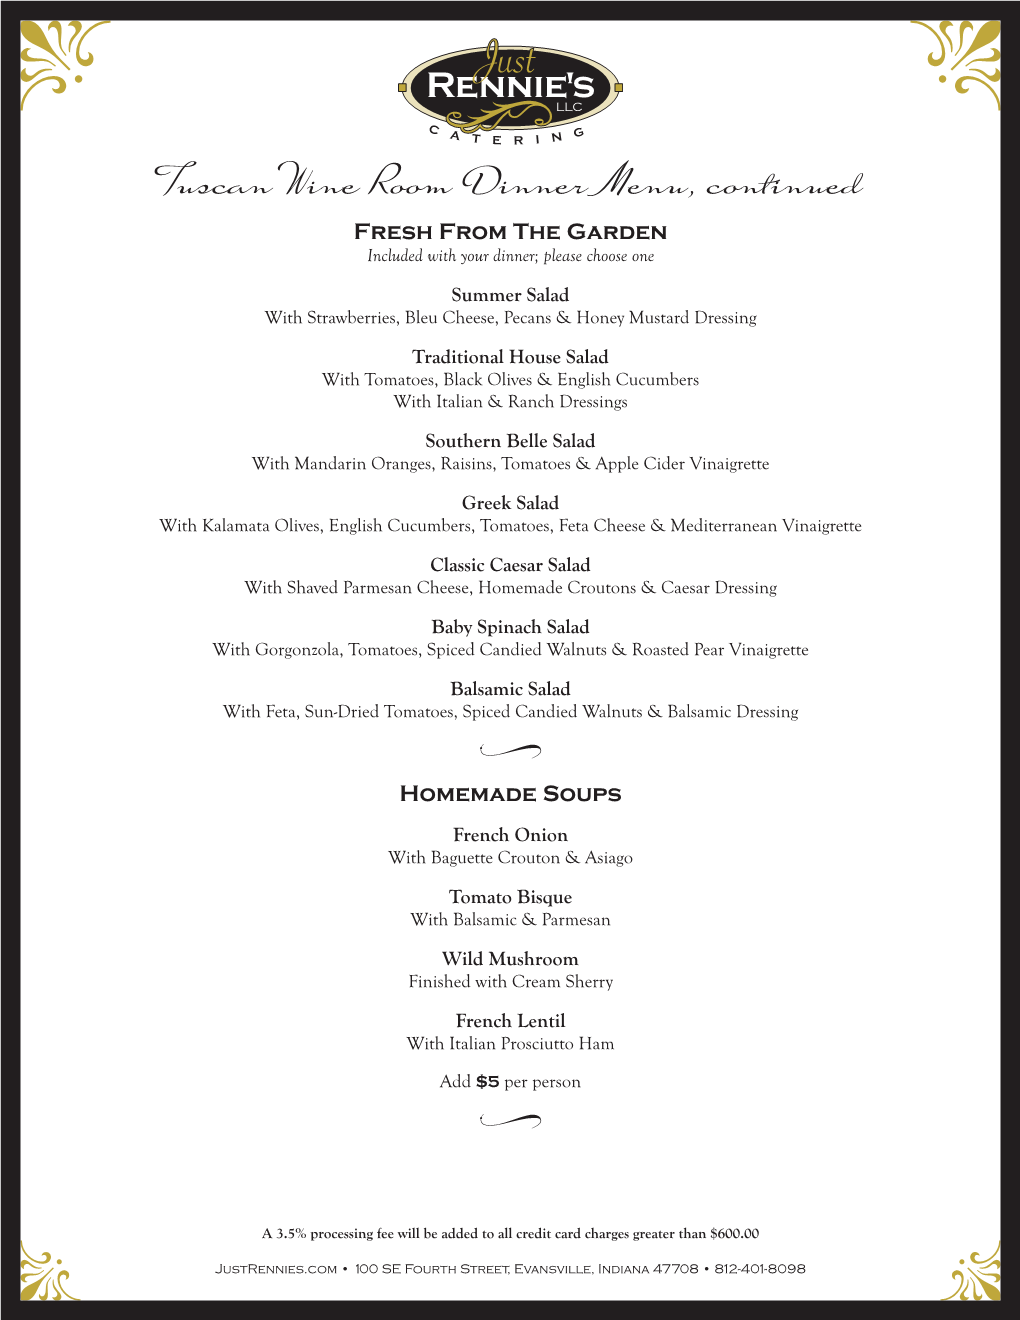 Tuscan Wine Room Dinner Menu, Continued Fresh from the Garden Included with Your Dinner; Please Choose One